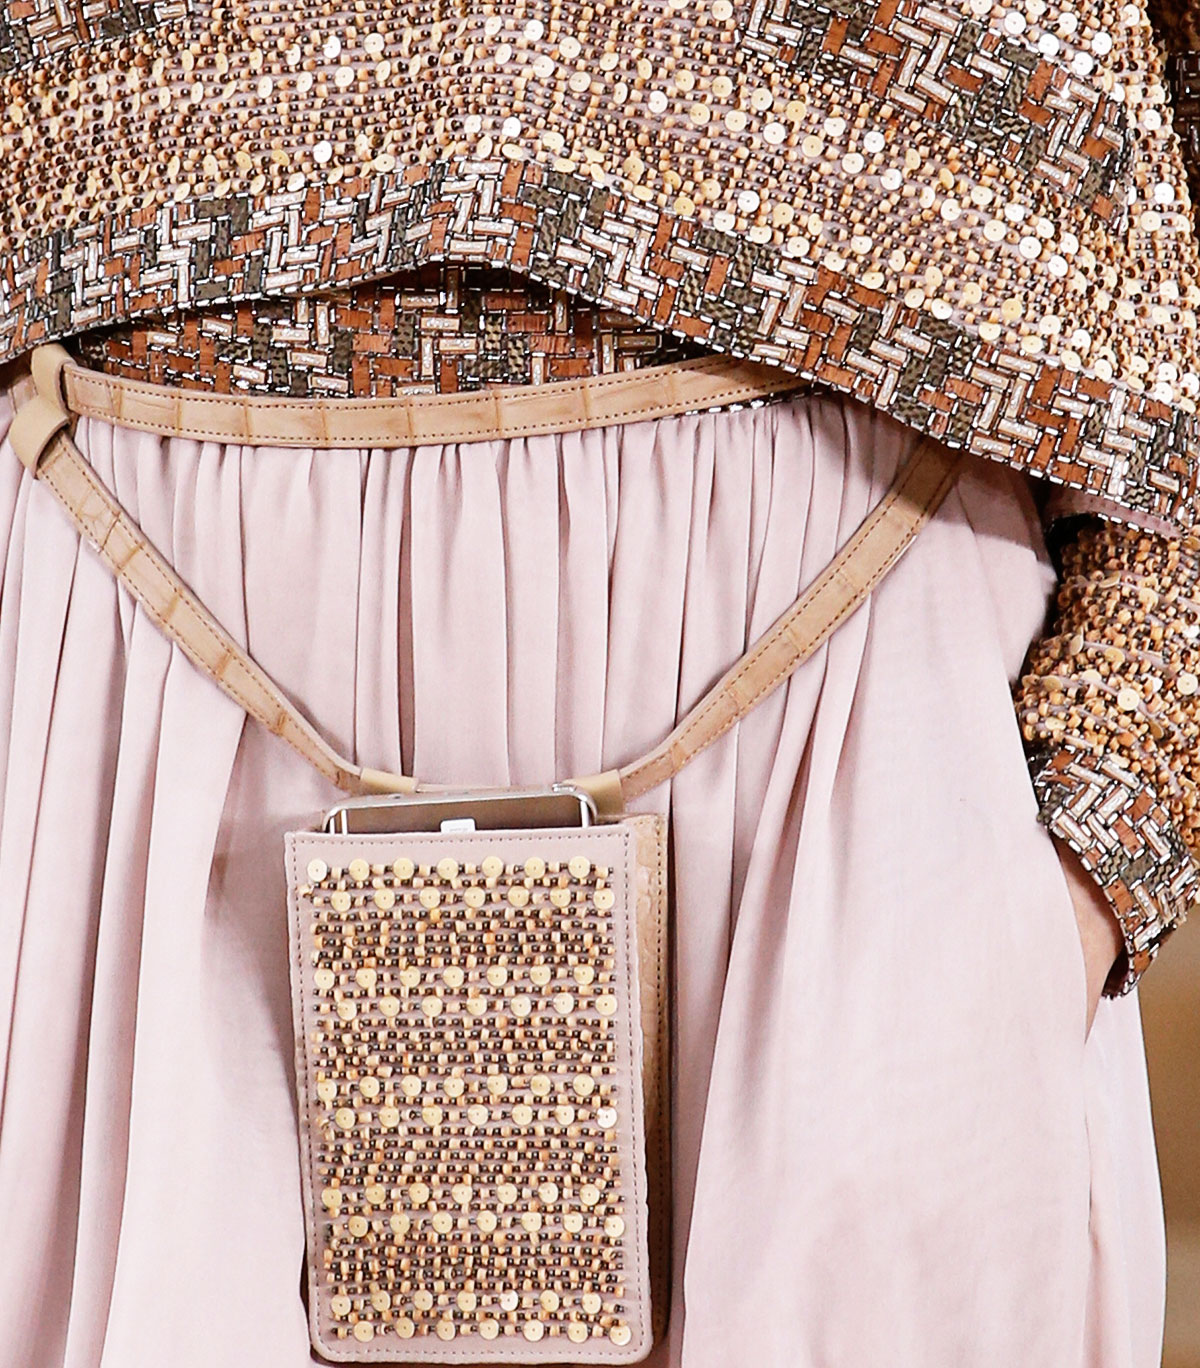 Chanel Spring 2016 Haute Couture sequins beads wood